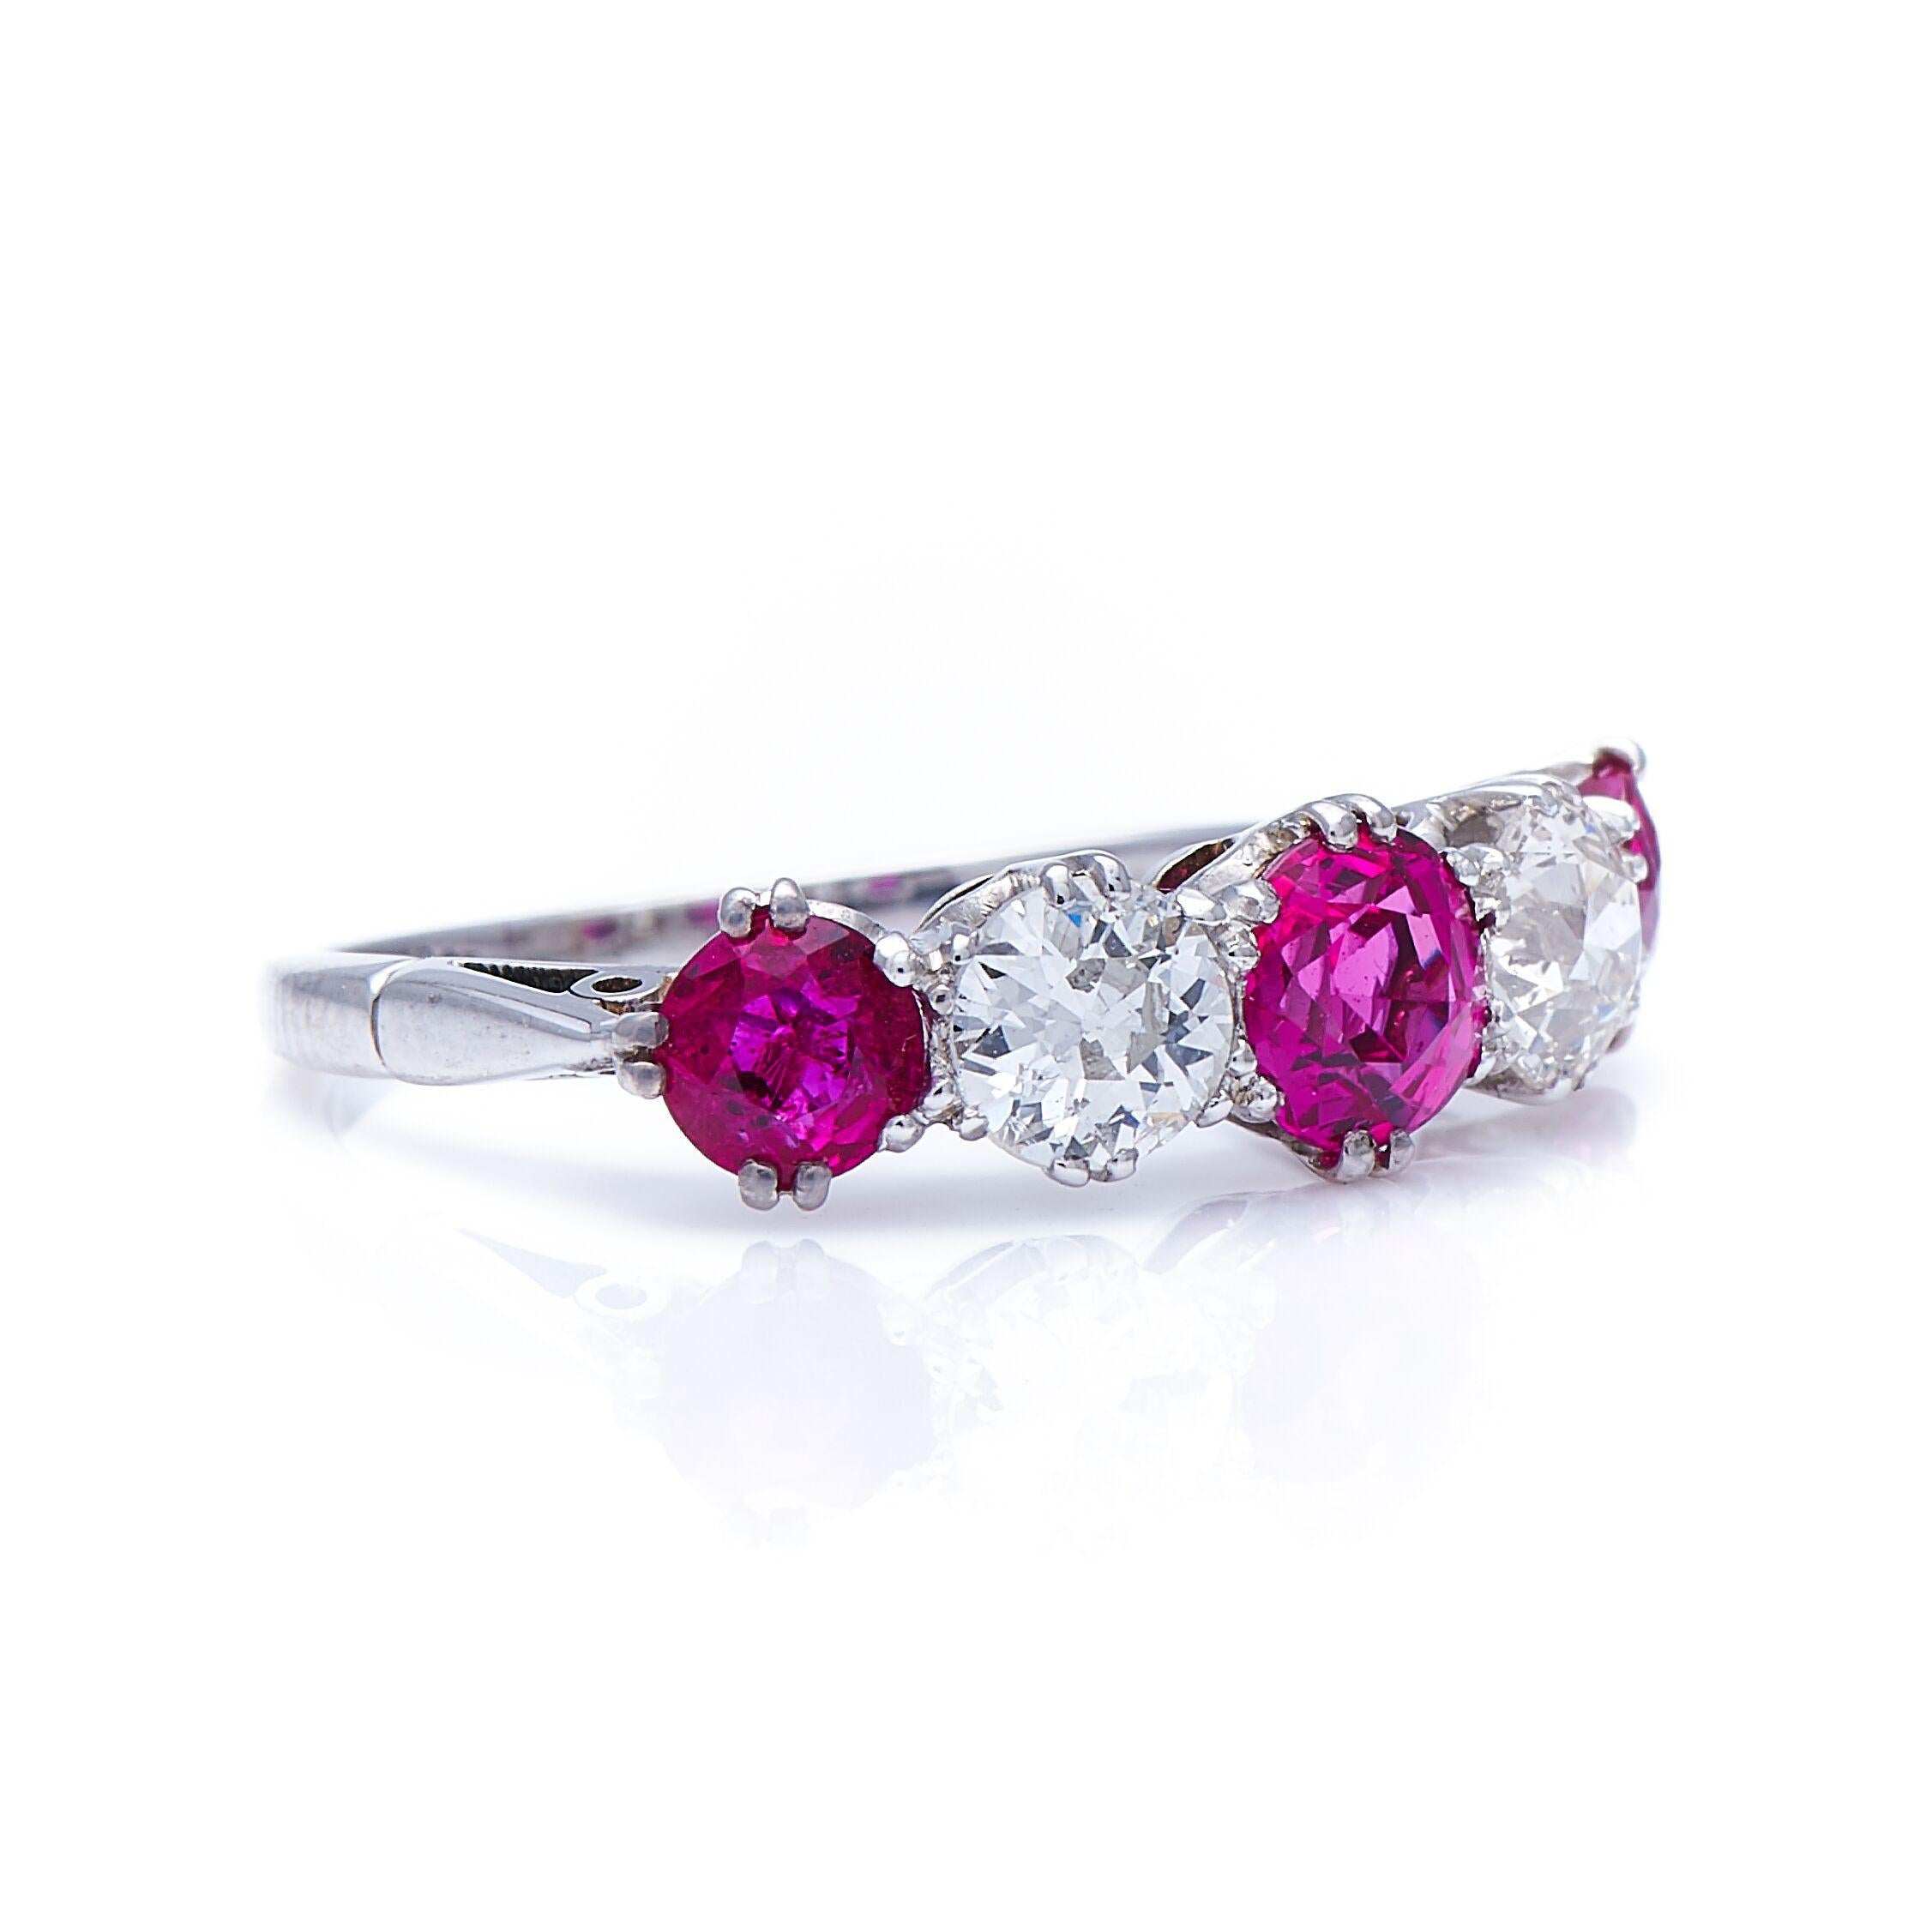 Diamond and ruby ring, early 20th century. This classic five-stone ring is set with a line of three lively deep pinkish rubies spaced with two circular-cut diamonds. Five stone rings are both traditional and versatile, substantial enough to work